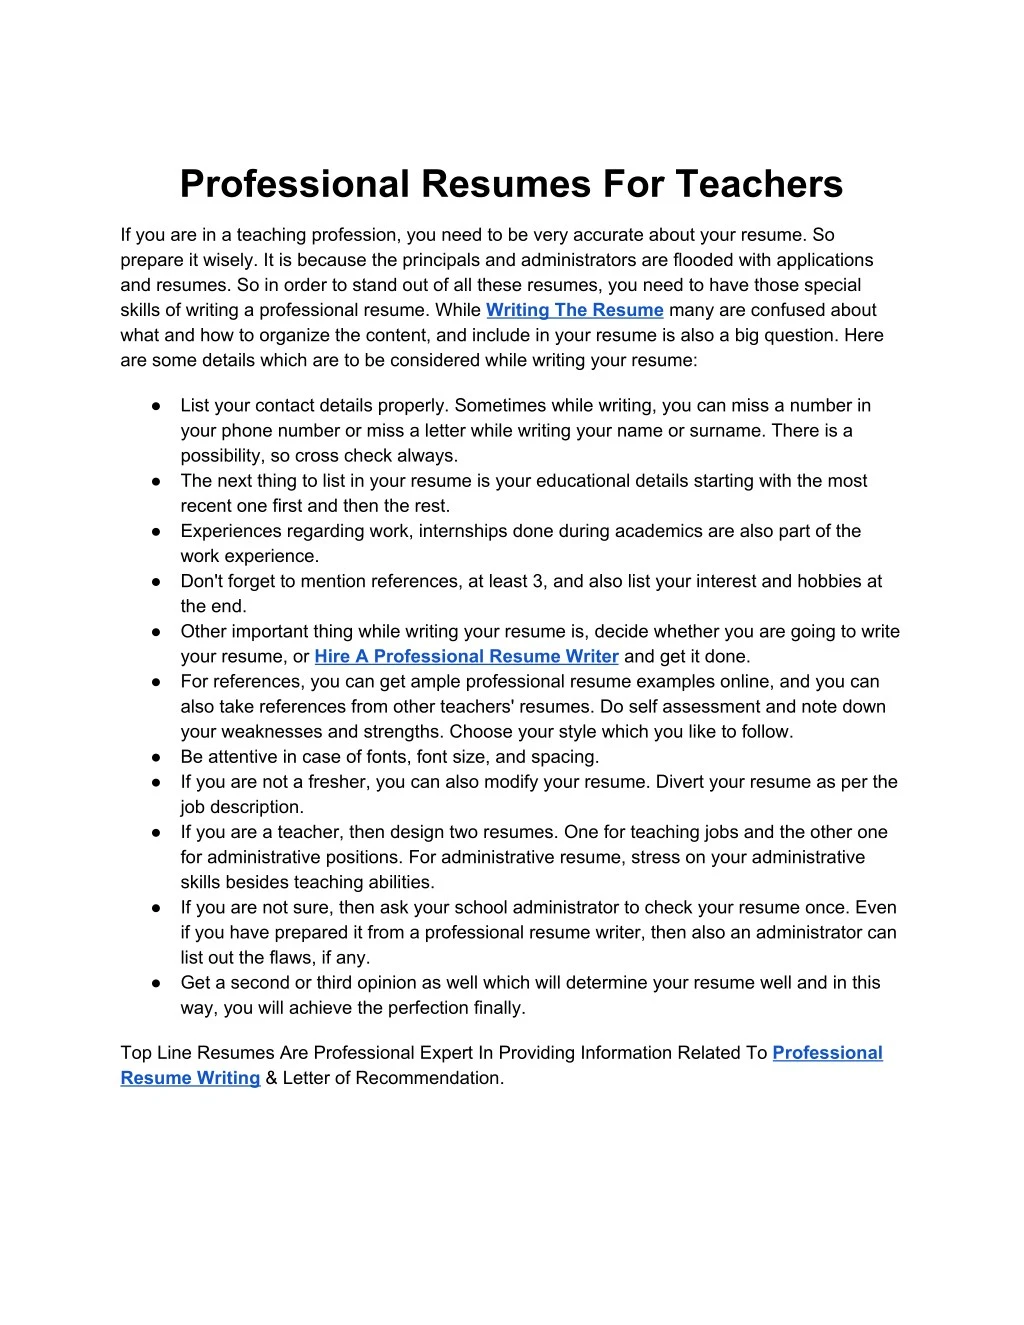 professional resumes for teachers